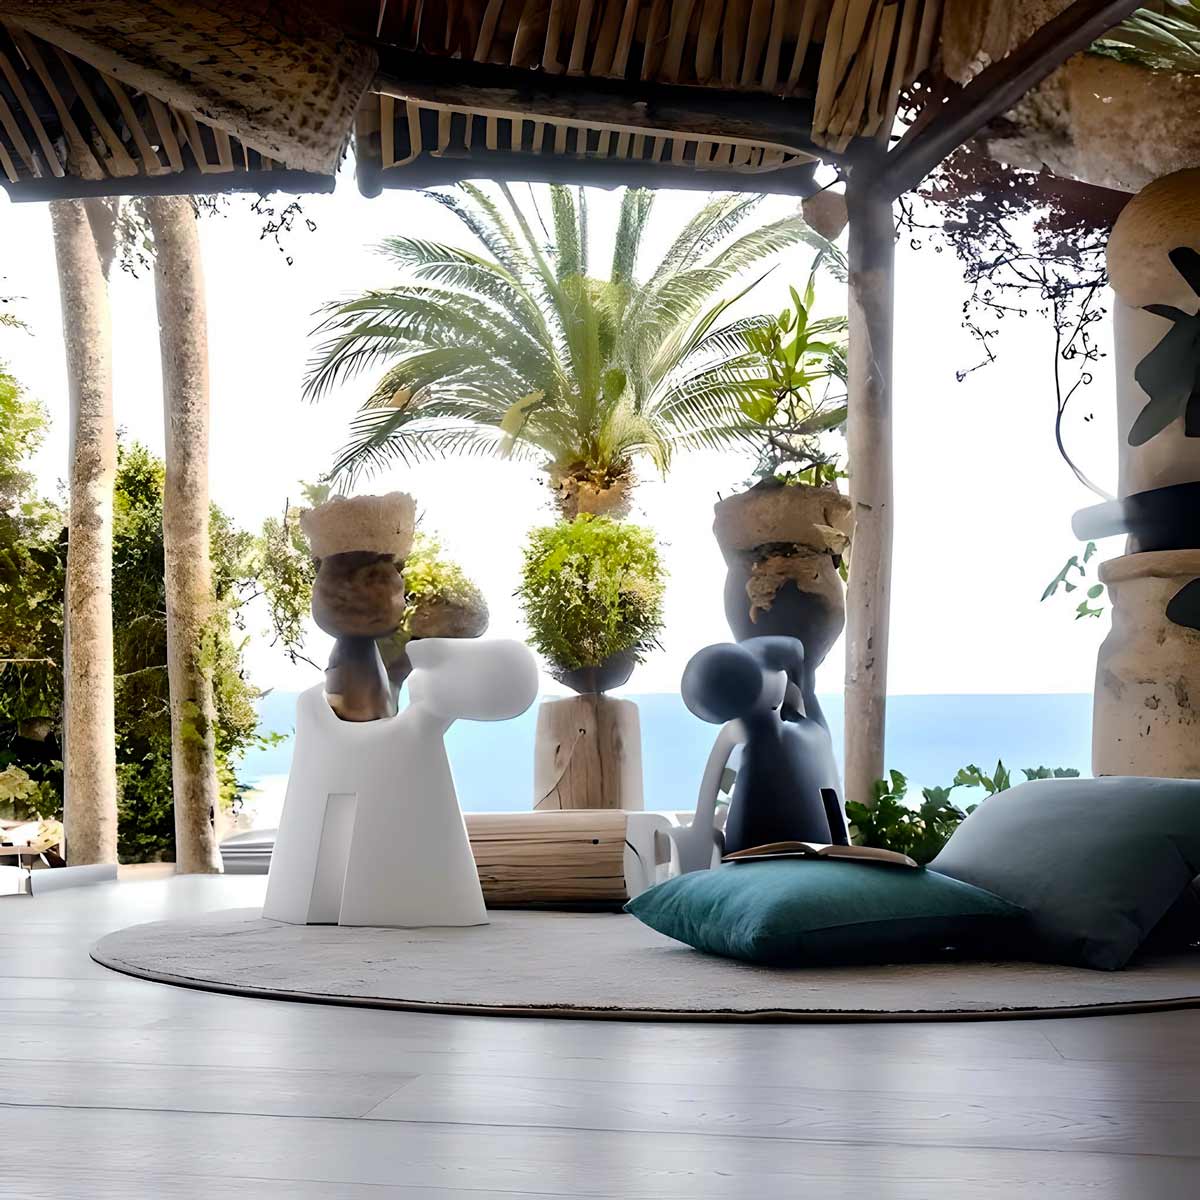 Iconic, oversized, colourful vases and unique indoor and outdoor furnishings